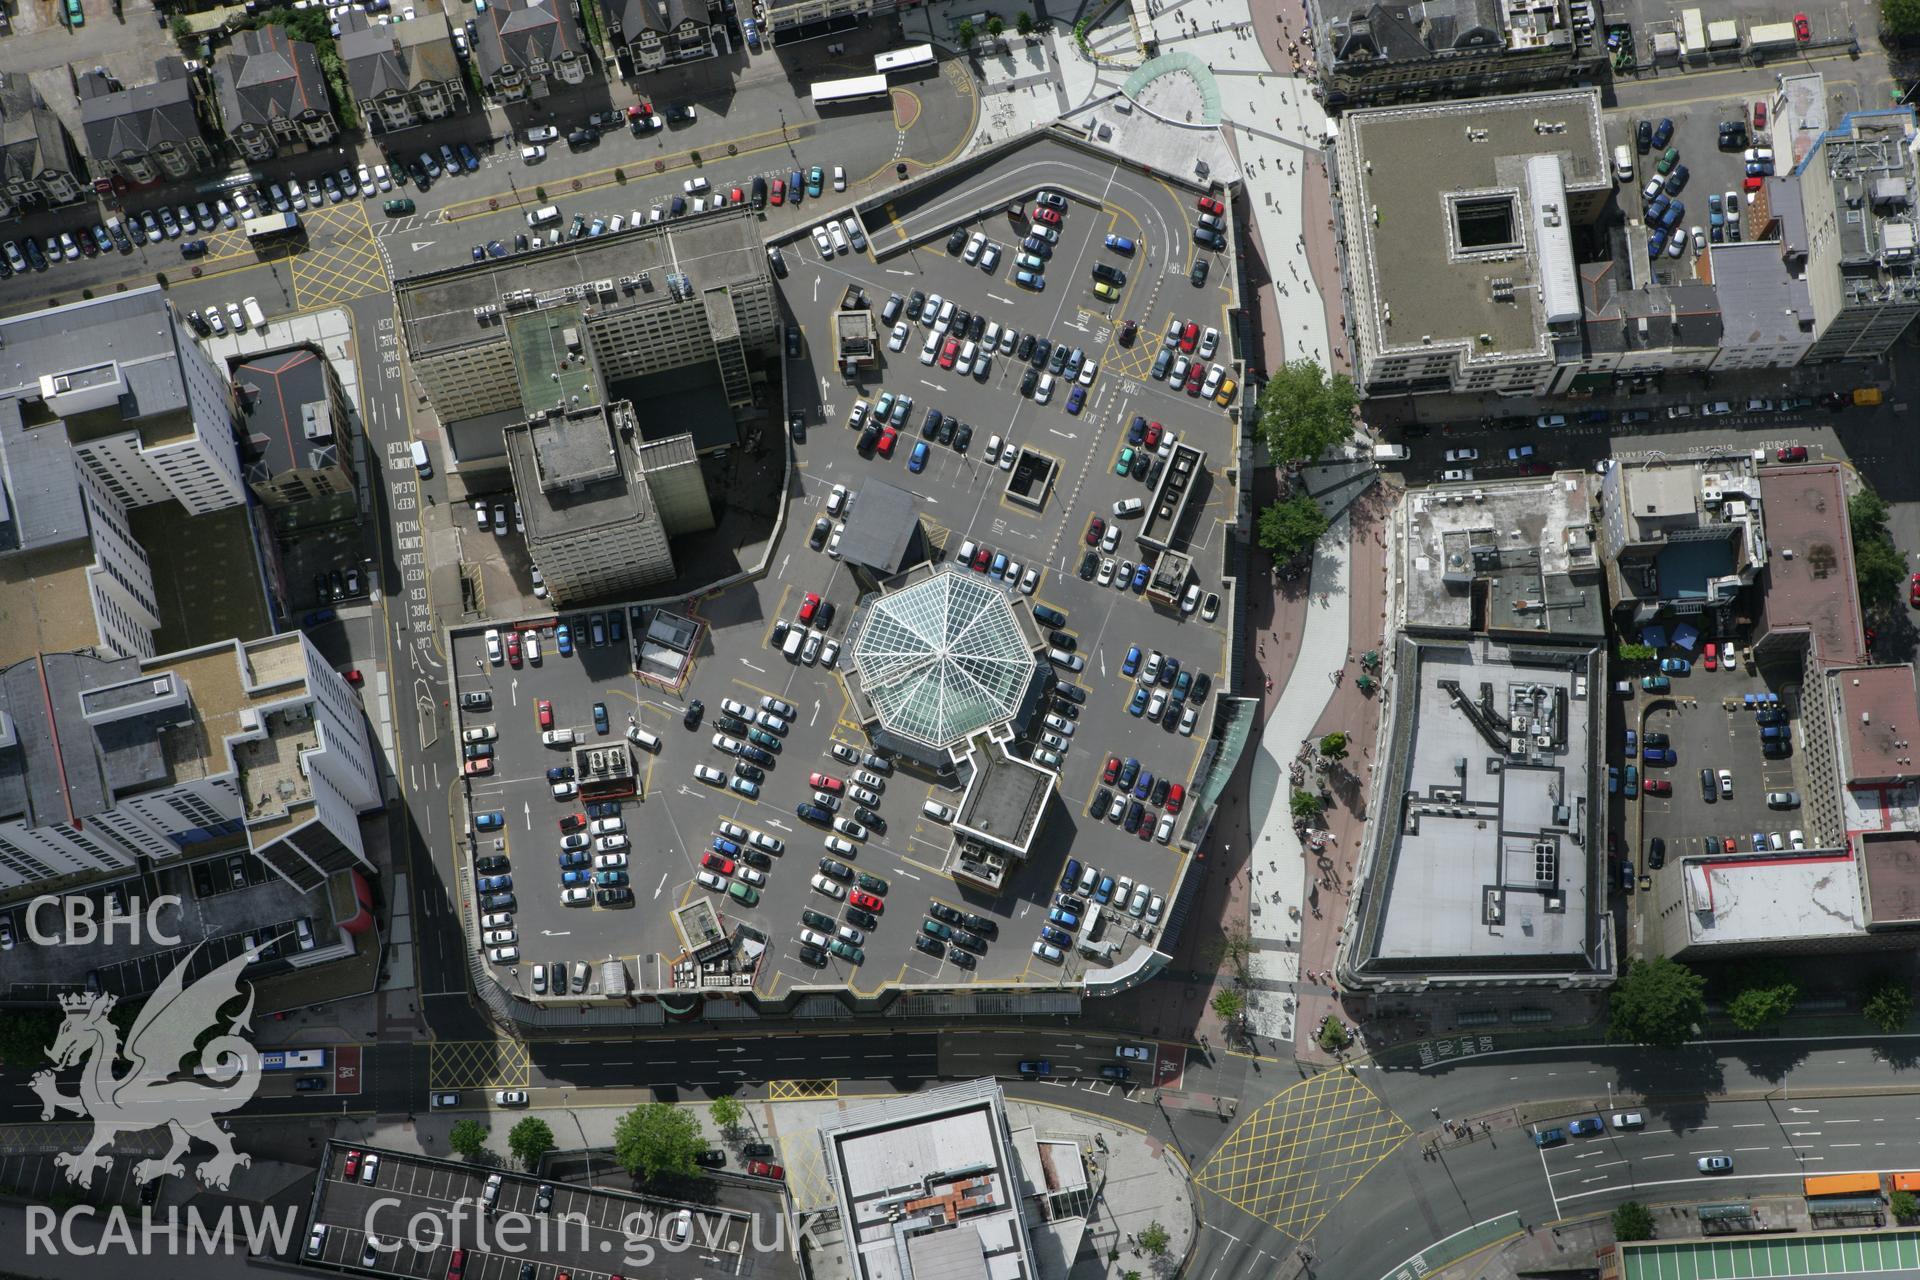 RCAHMW colour oblique aerial photograph of Cardiff. The city centre with Queen Street and the Capitol Shopping Centre. Taken on 30 July 2007 by Toby Driver